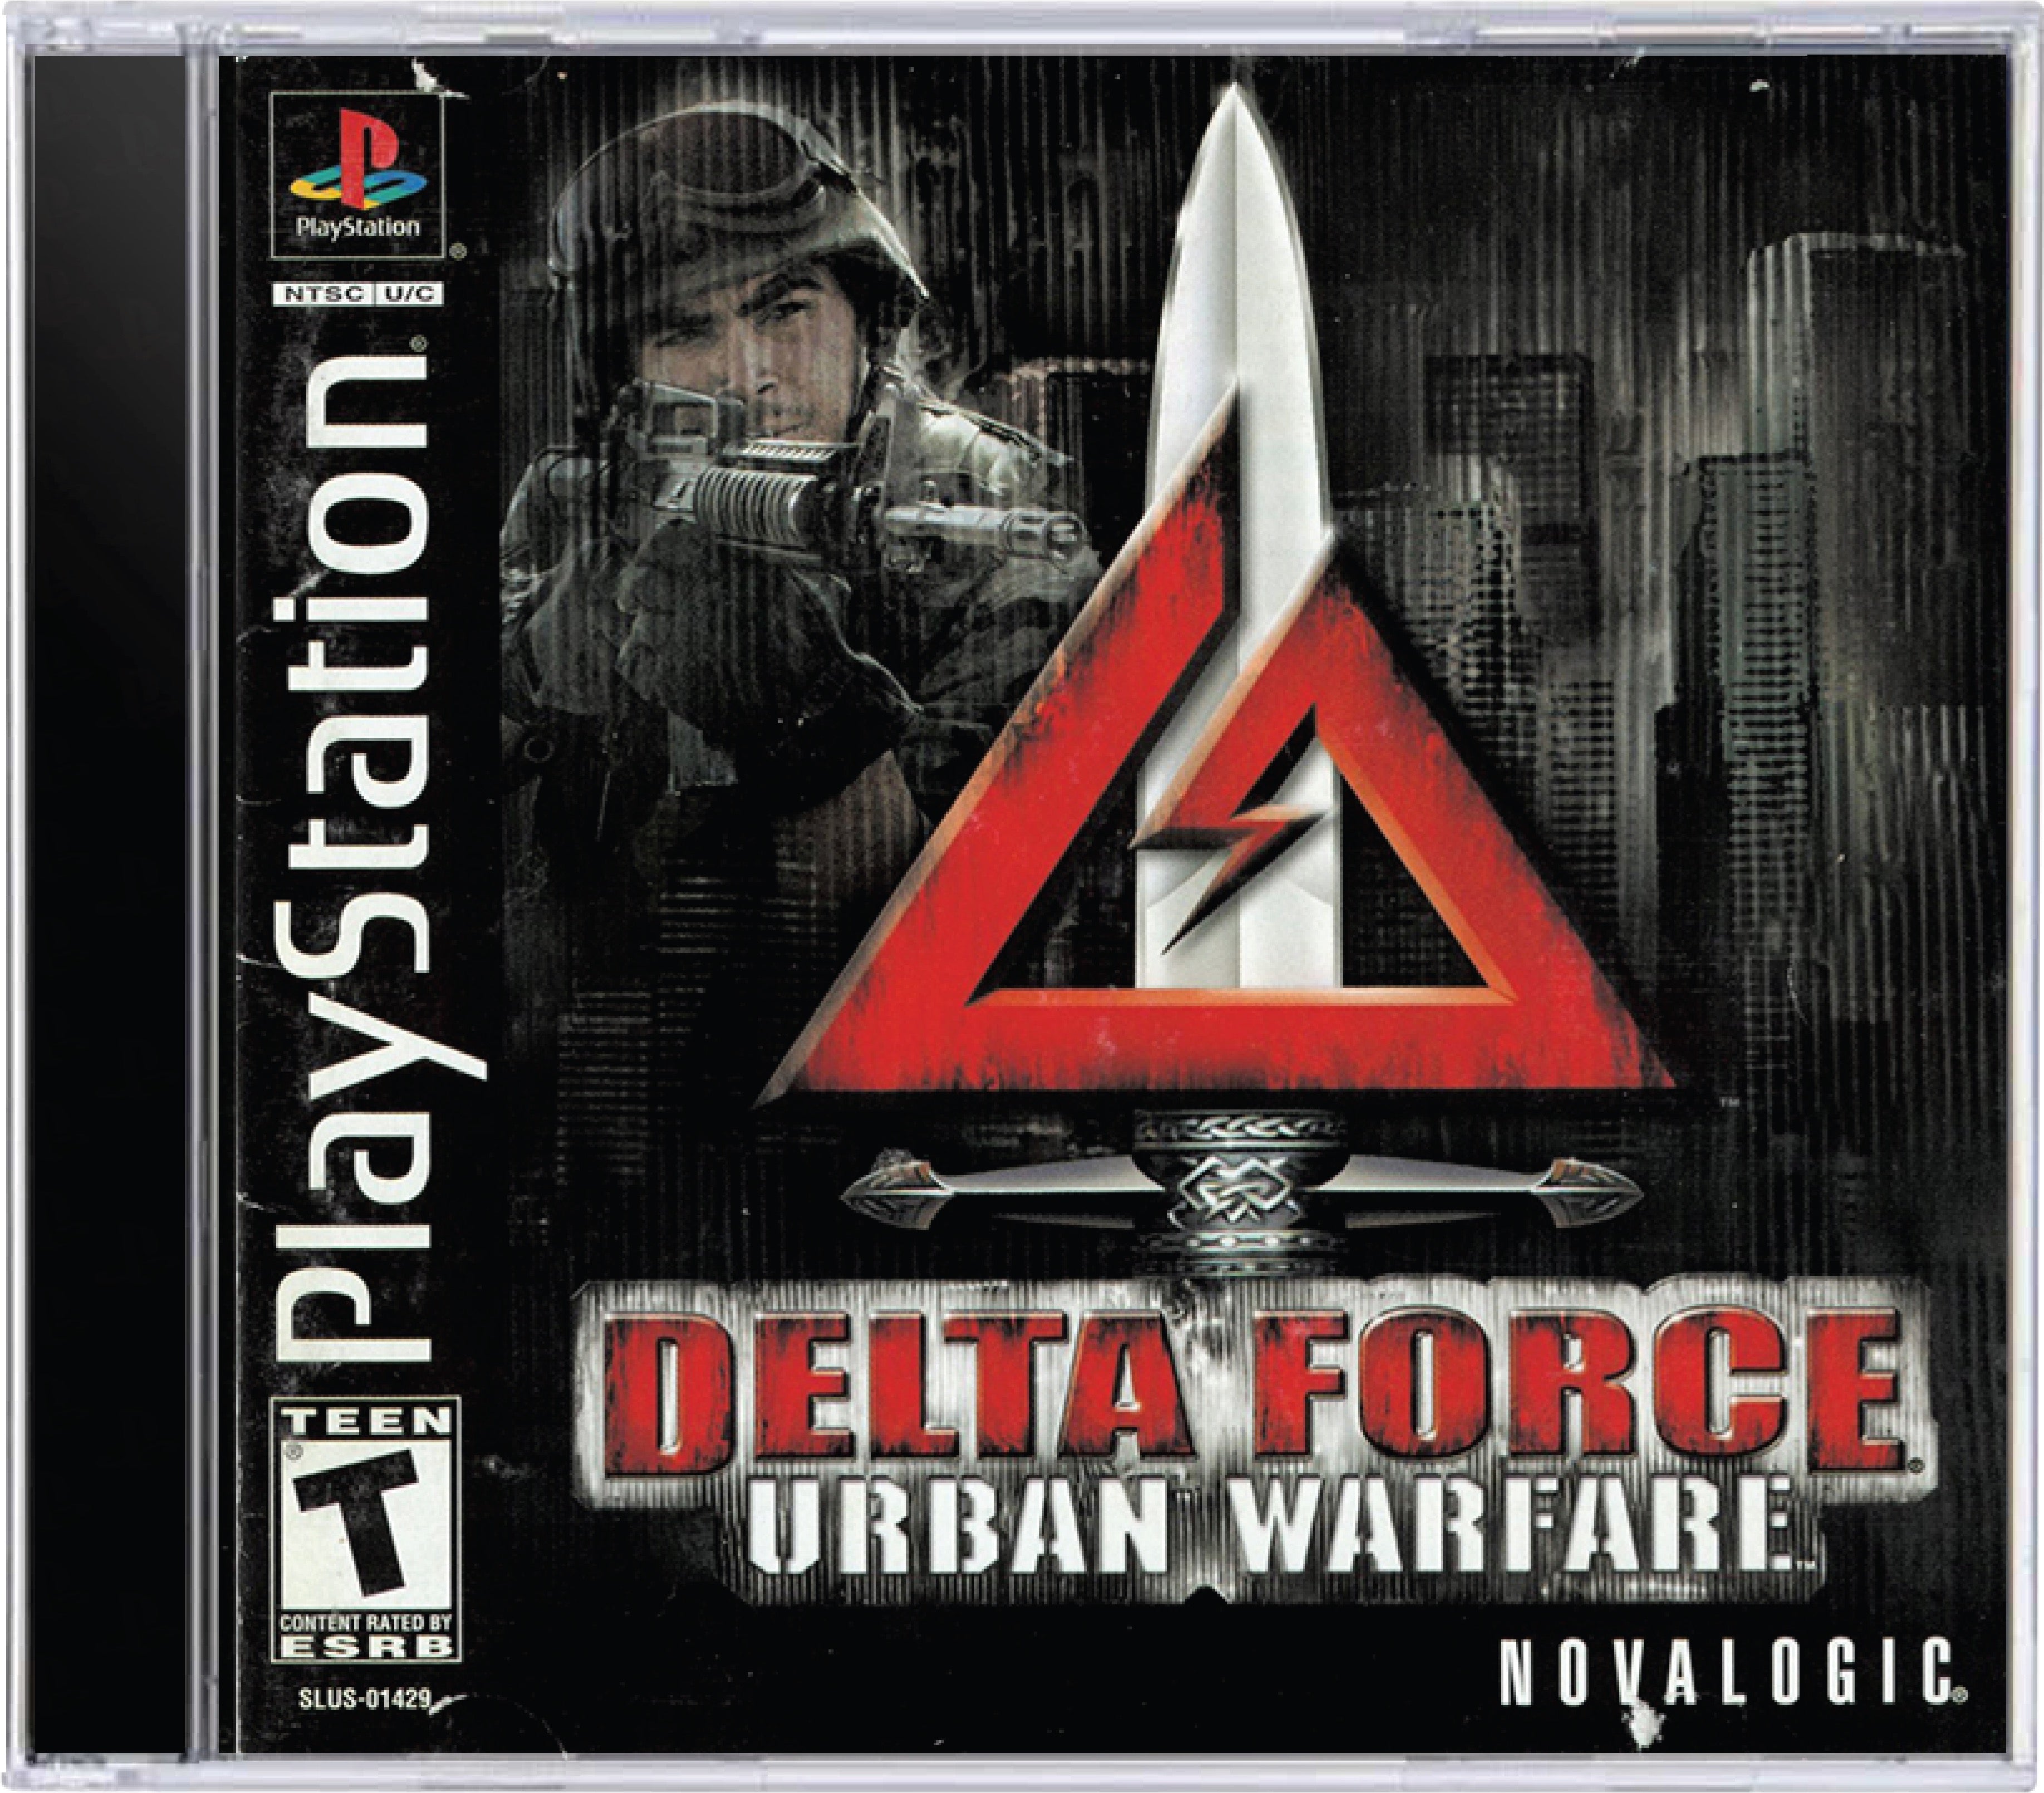 Delta Force Urban Warfare Cover Art and Product Photo